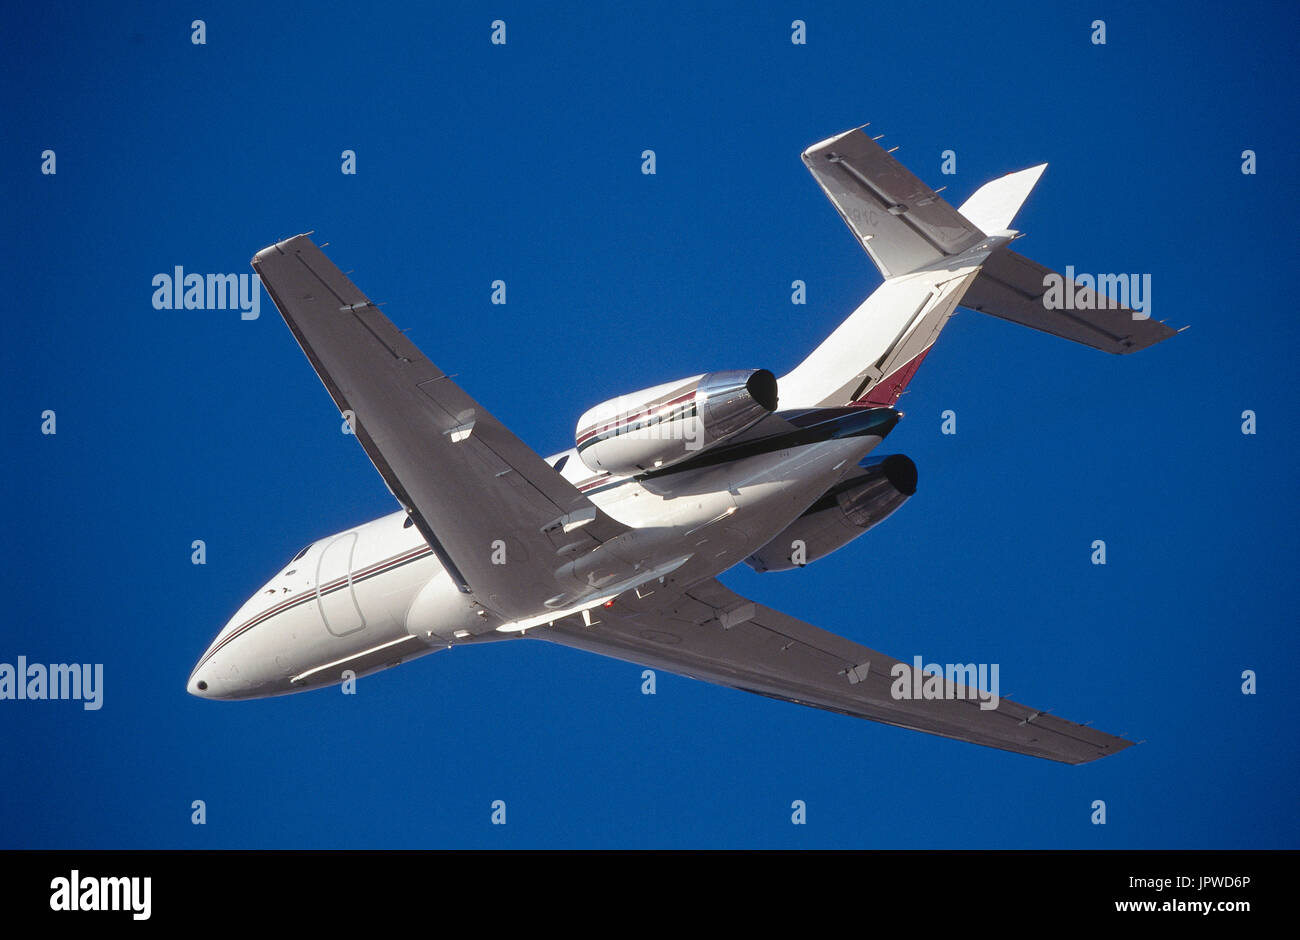 Hawker 800 business-jet climbing-enroute into a dark blue sky Stock Photo